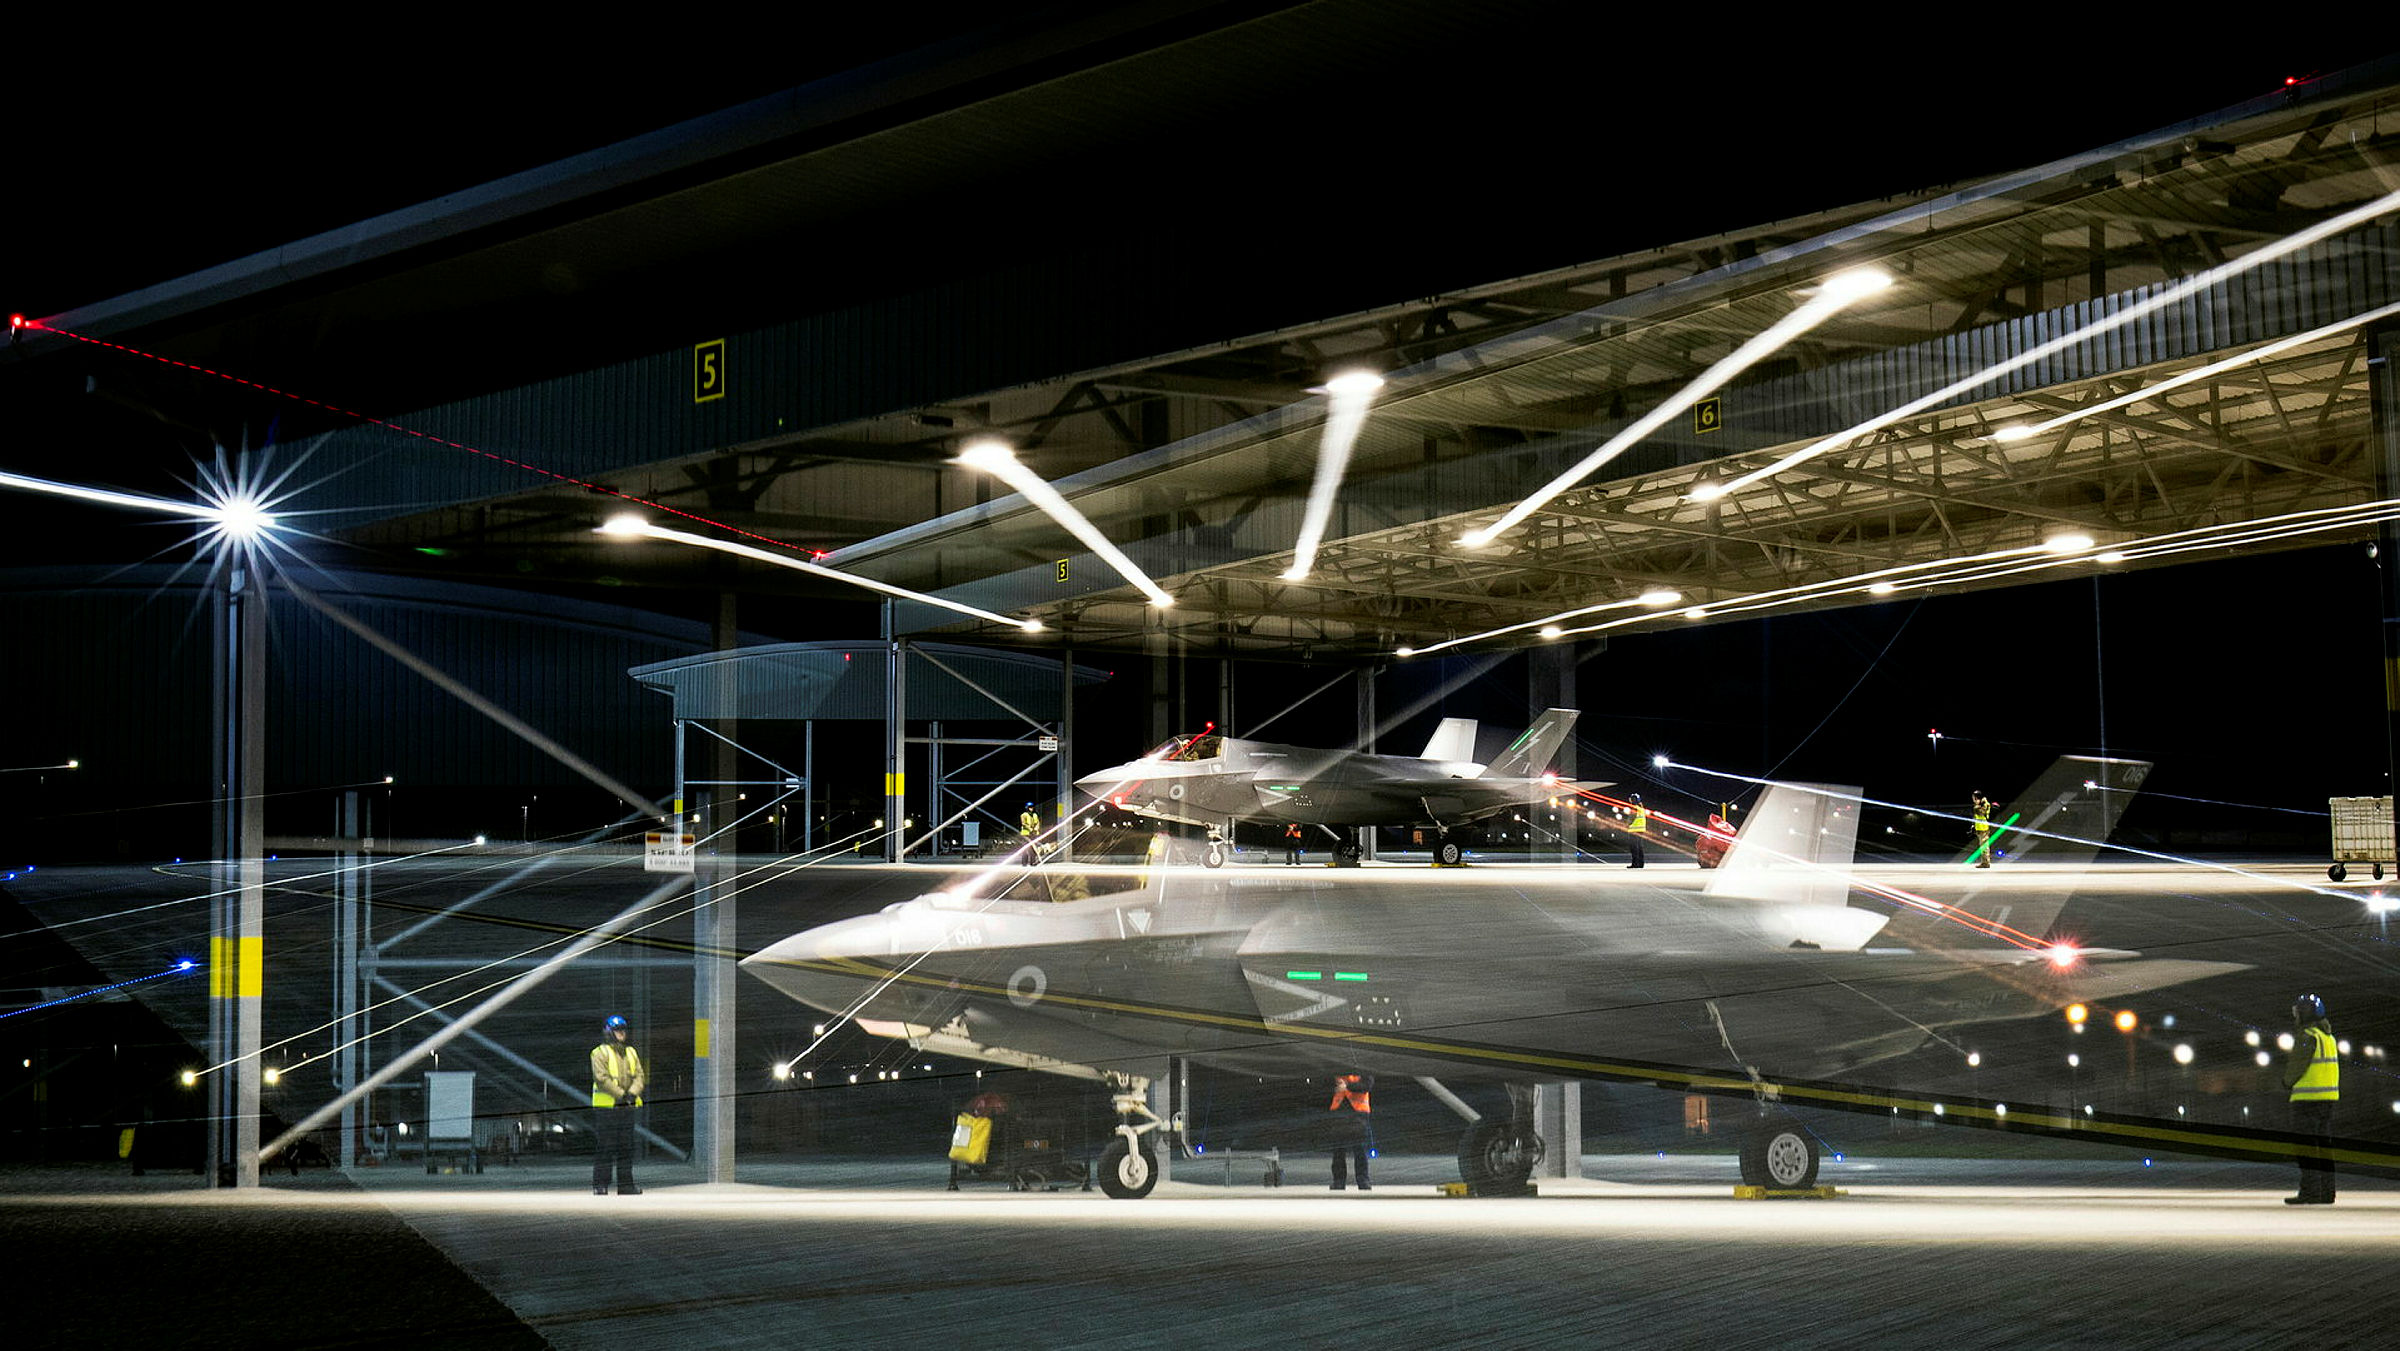 F-35B Lightning in a hangar, with lights and a hologram projection of the aircraft above.